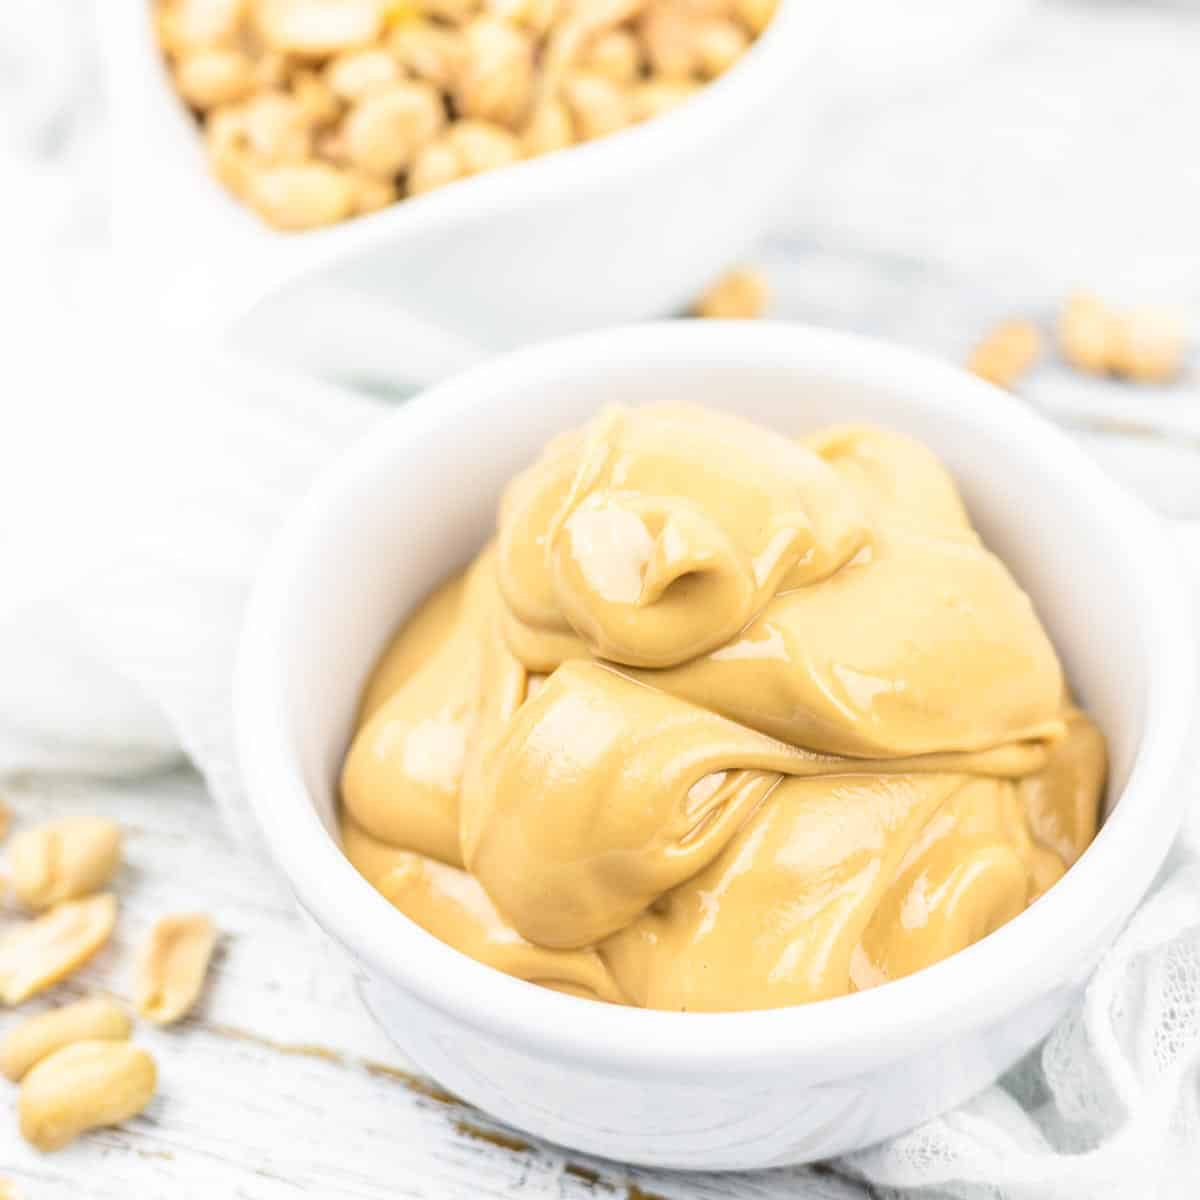 How To Make Peanut Butter in a white bowl ready to serve